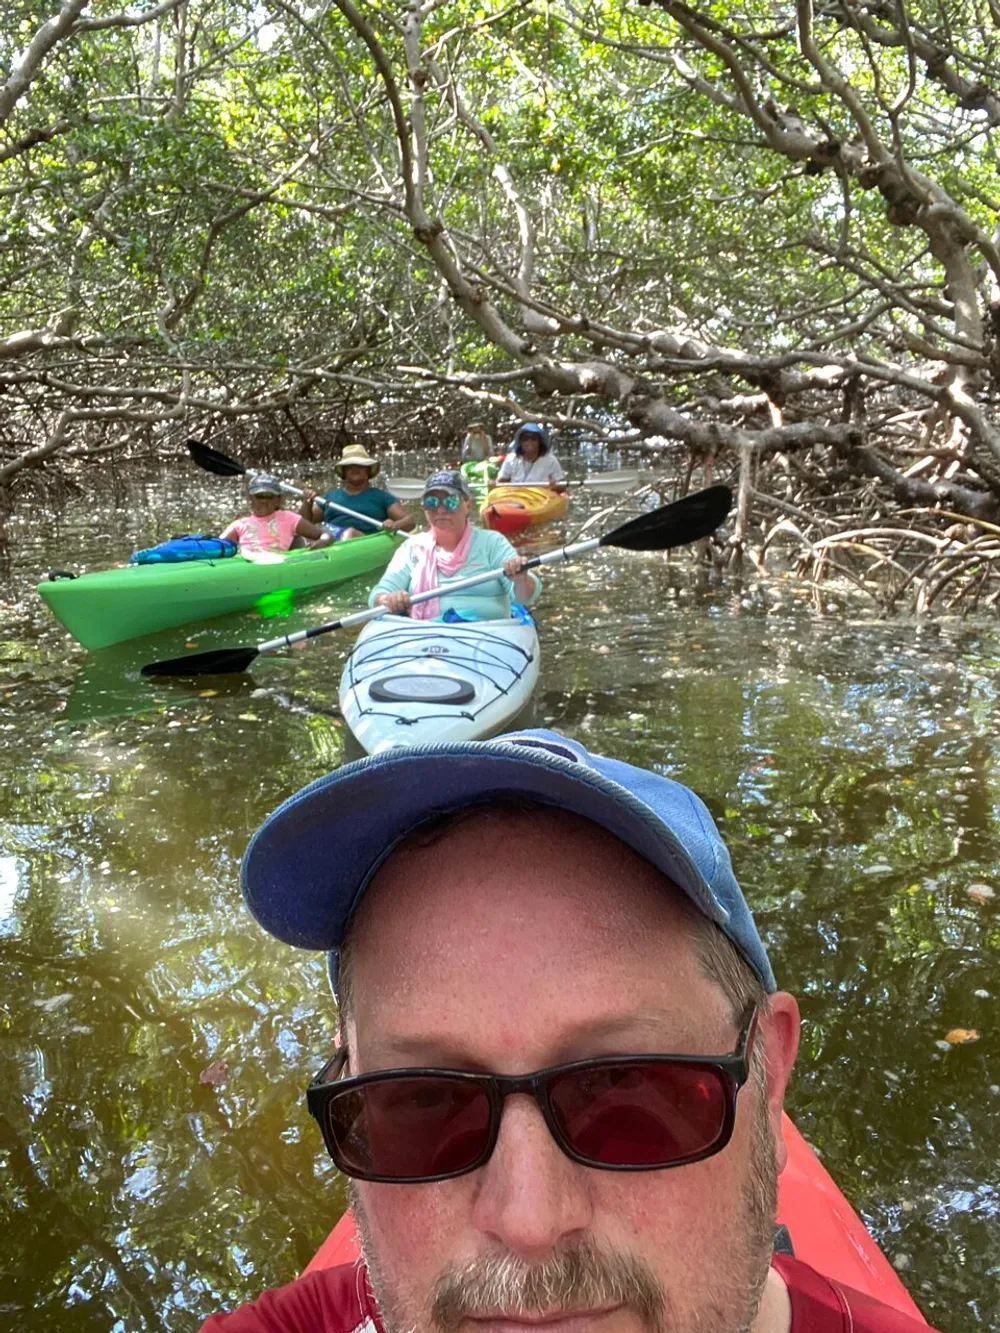 A group of people are kayaking in a mangrove forest with the forefront showing a selfie of a man wearing sunglasses and a baseball cap